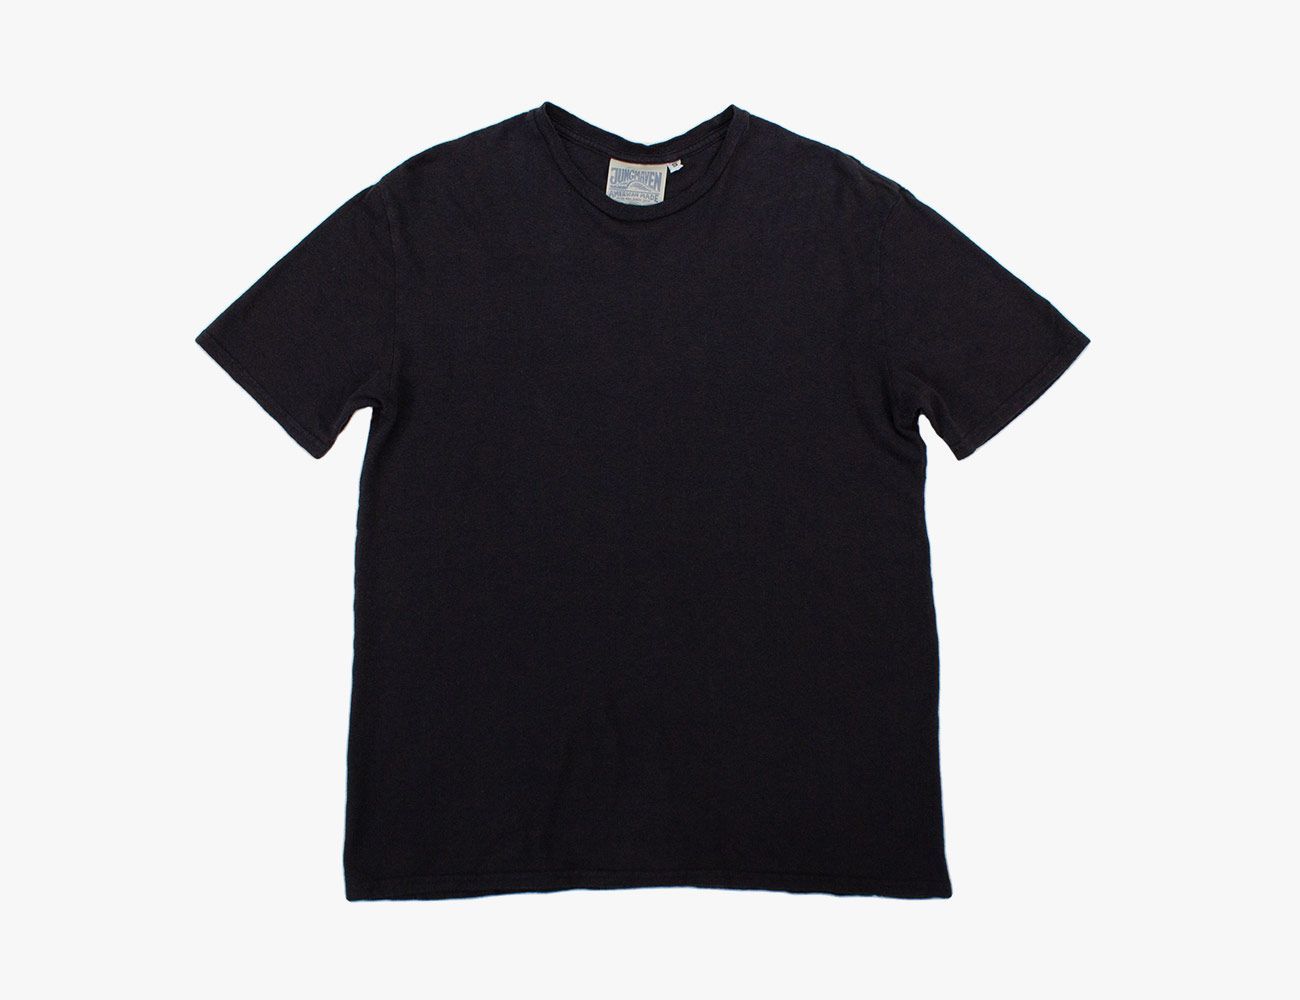 plain black t shirt for women front and back